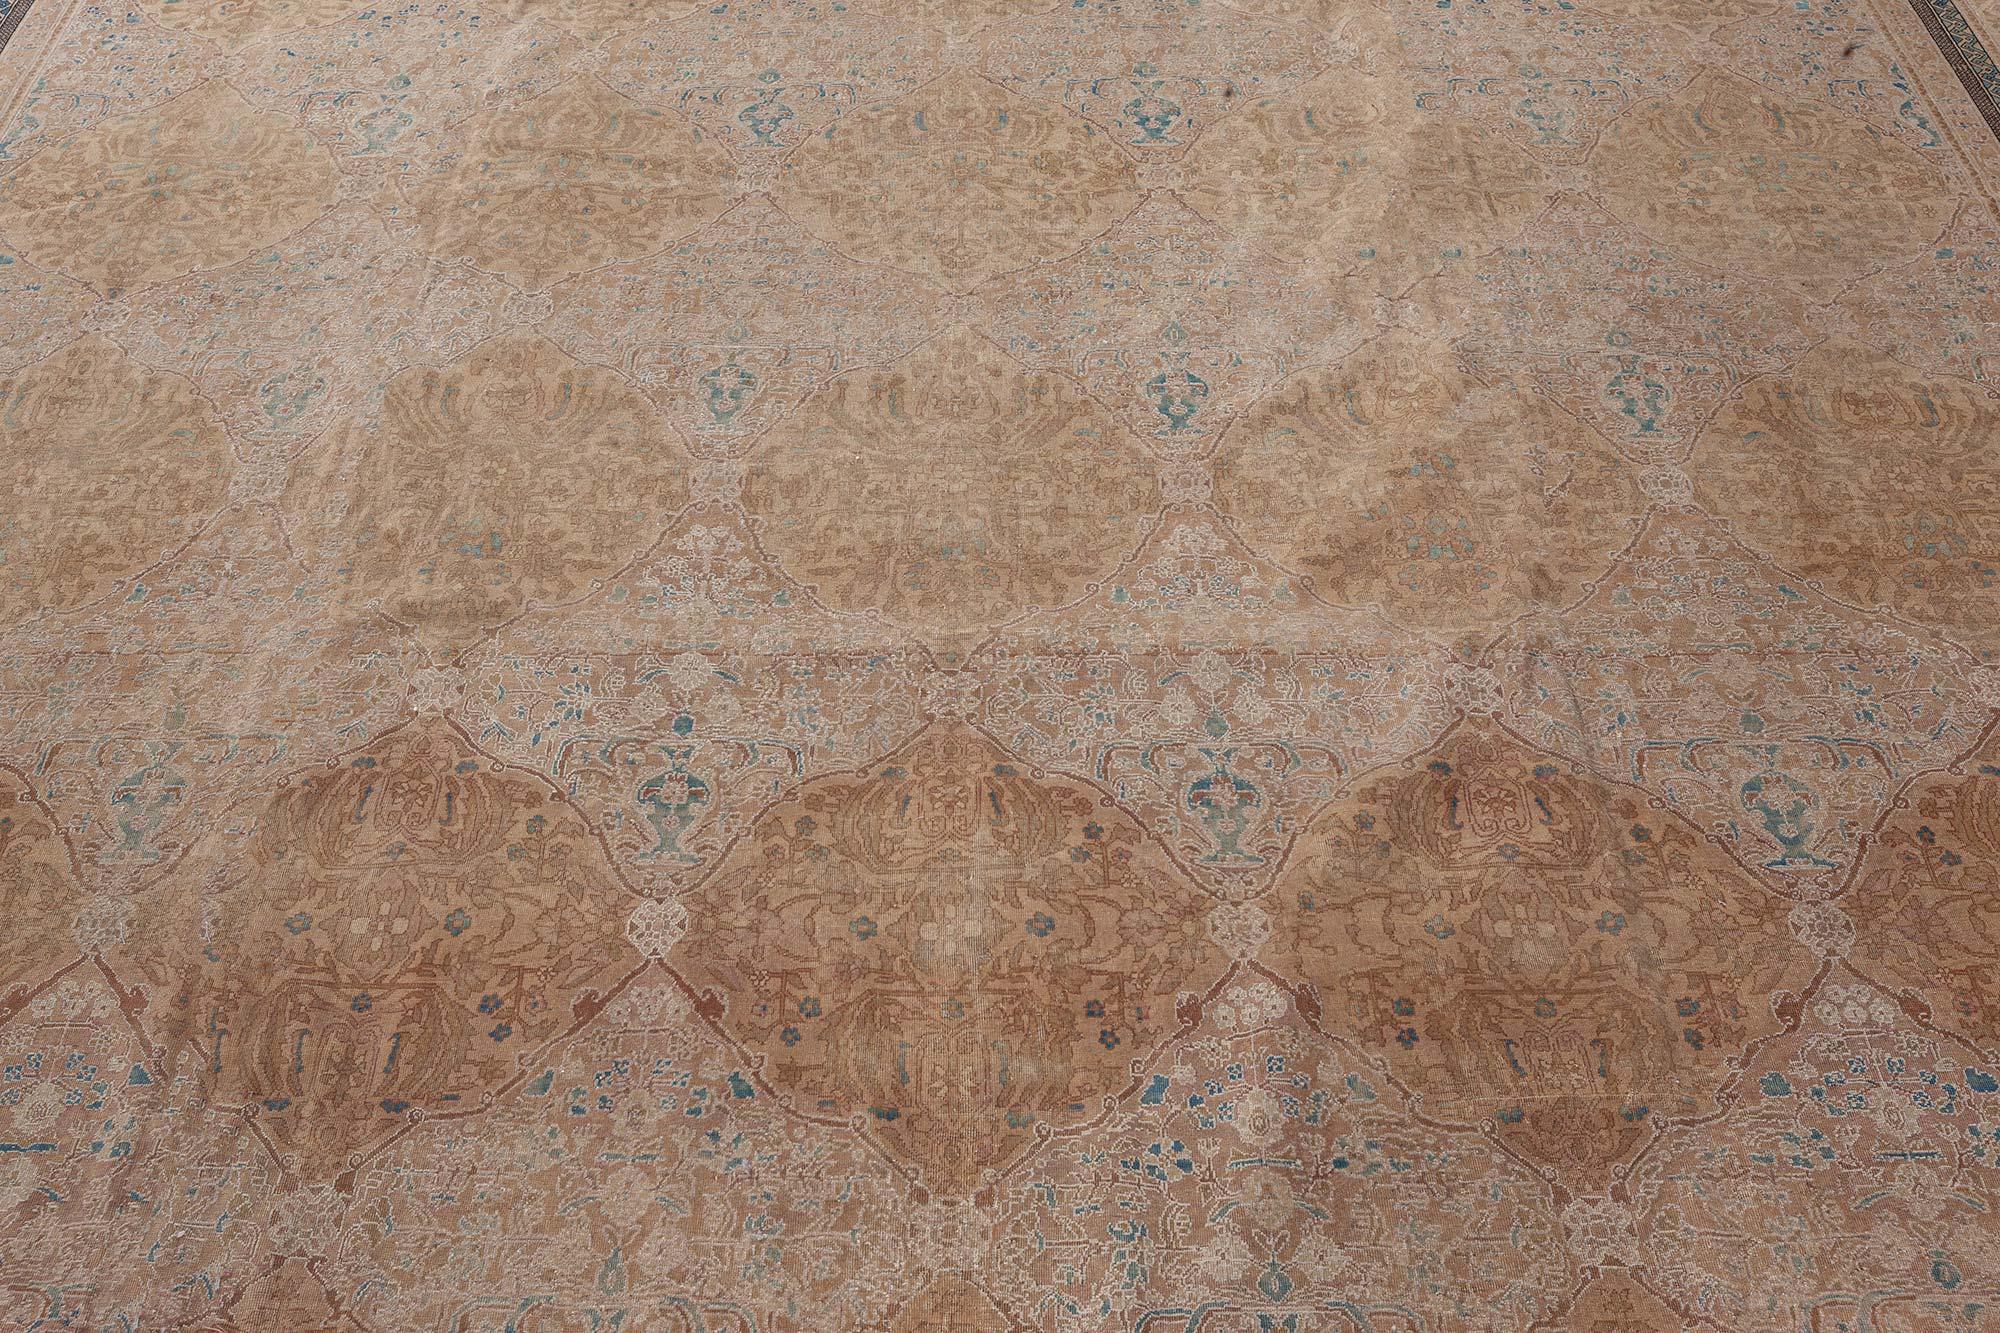 Midcentury Indian Botanic Handmade Wool Carpet In Good Condition For Sale In New York, NY